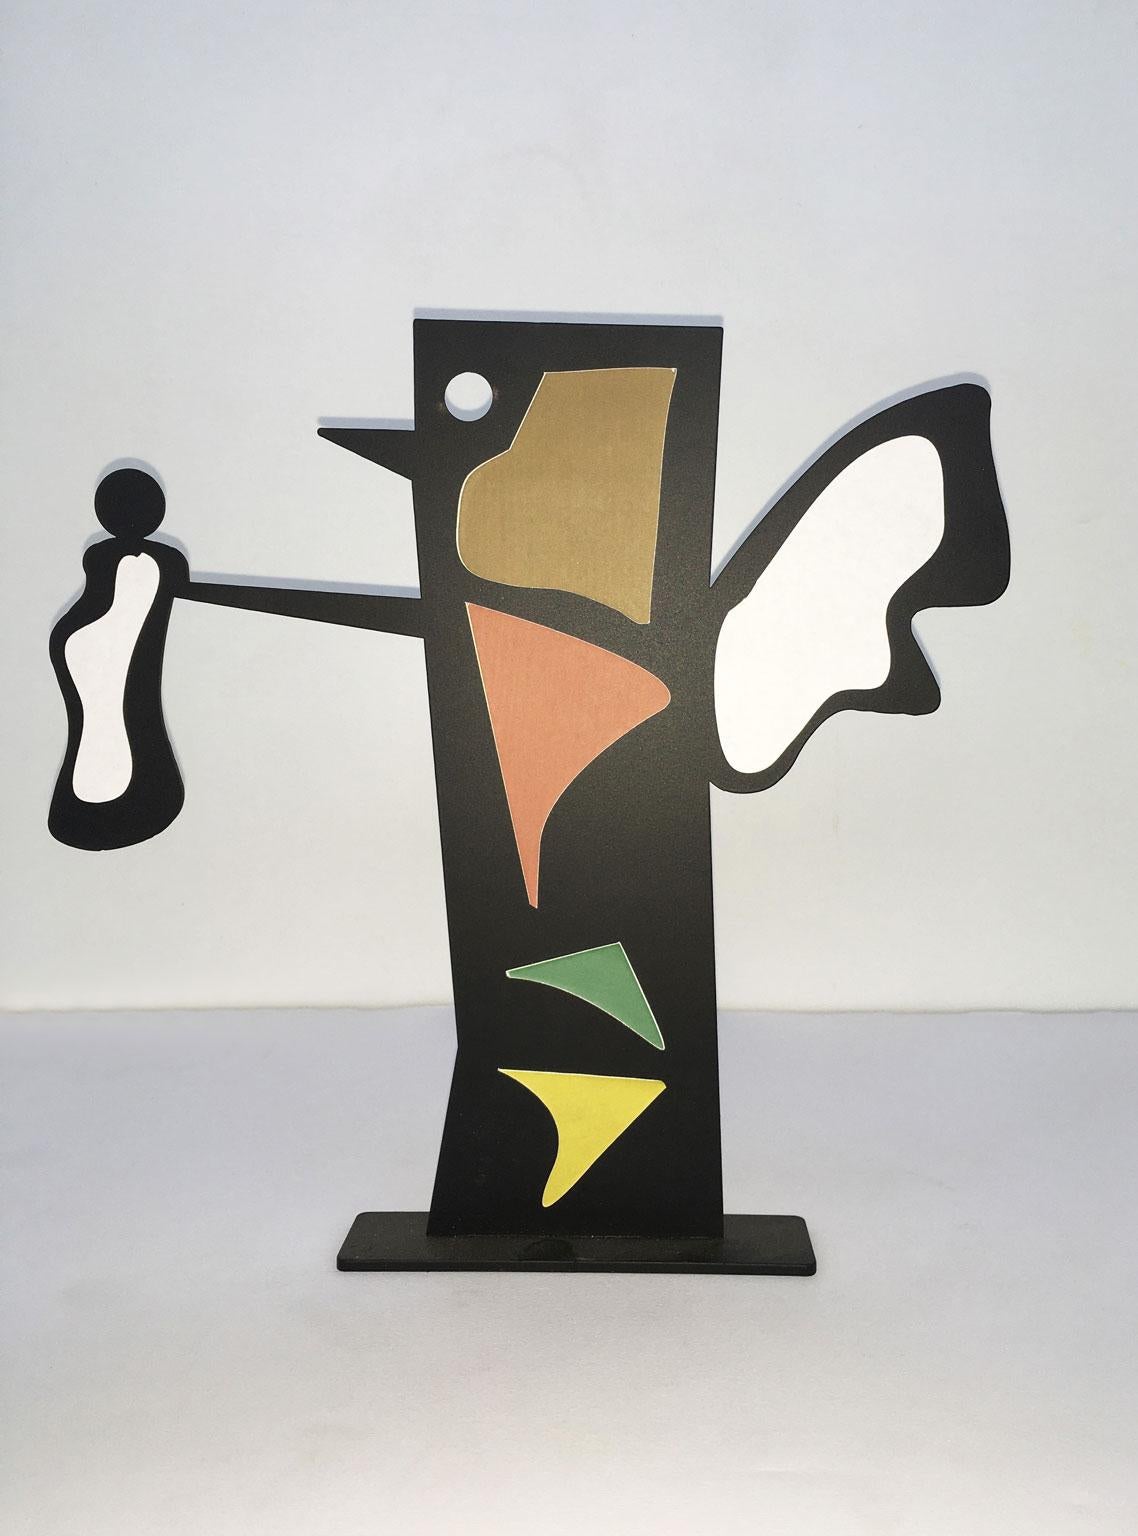 This sculpture is a multiple 1 piece of 50 realized in 1980 by the well known international artist Riccardo Dalisi.
All the pieces are numbered and signed by the artist and completed by the Certificate of the artist and the Editor who made the